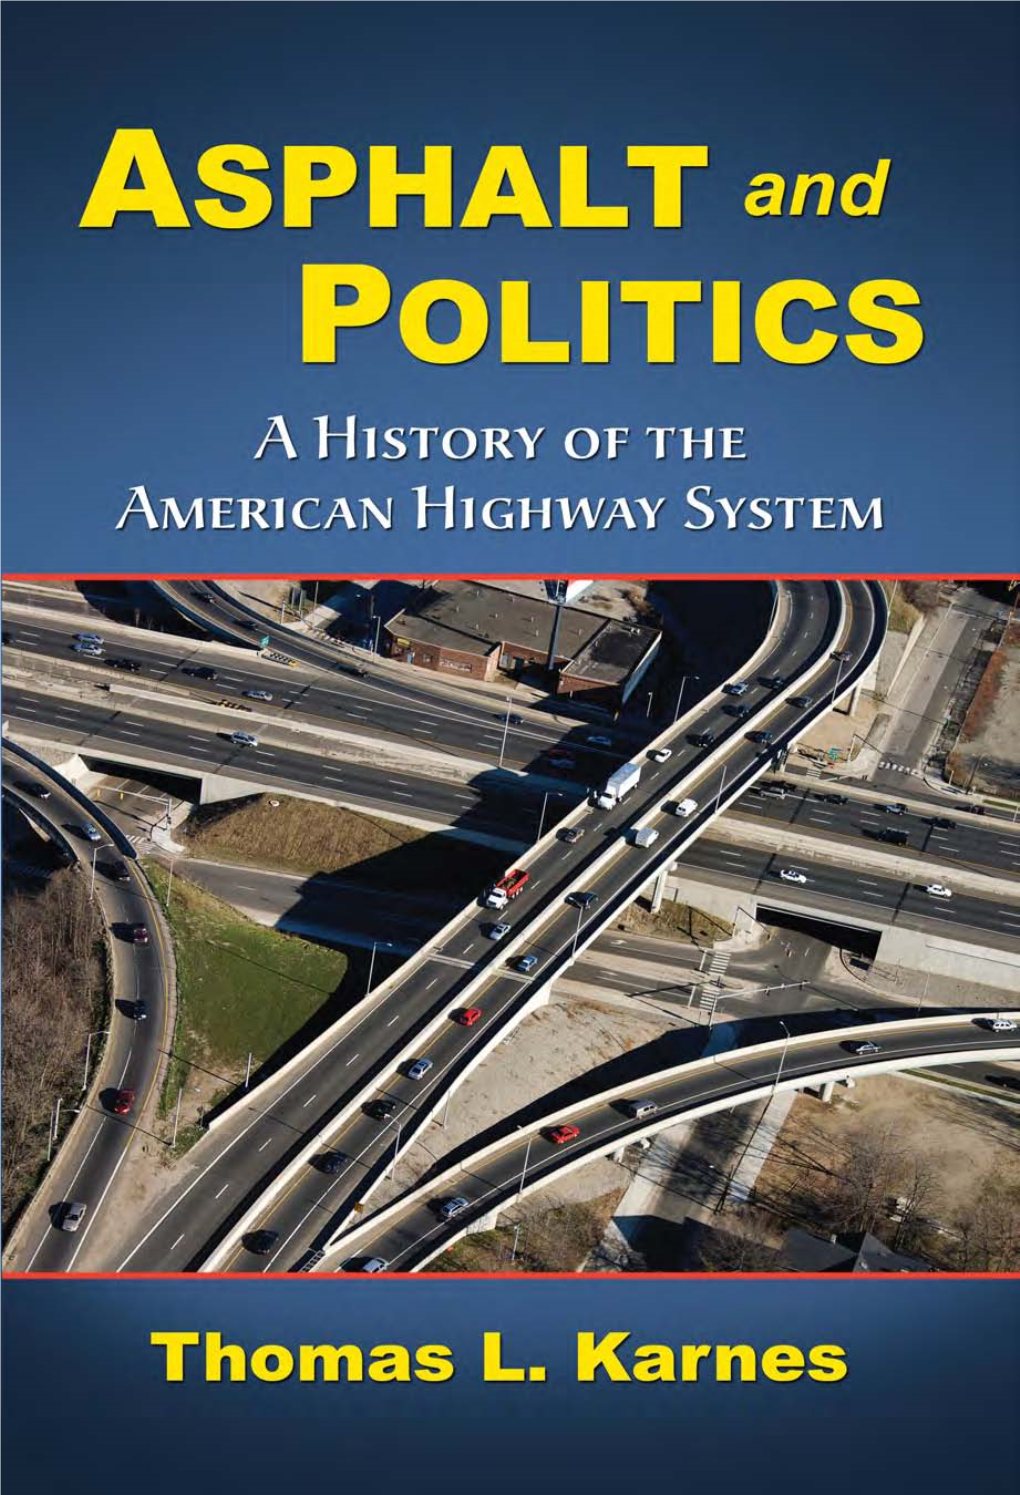 Asphalt and Politics: a History of the American Highway